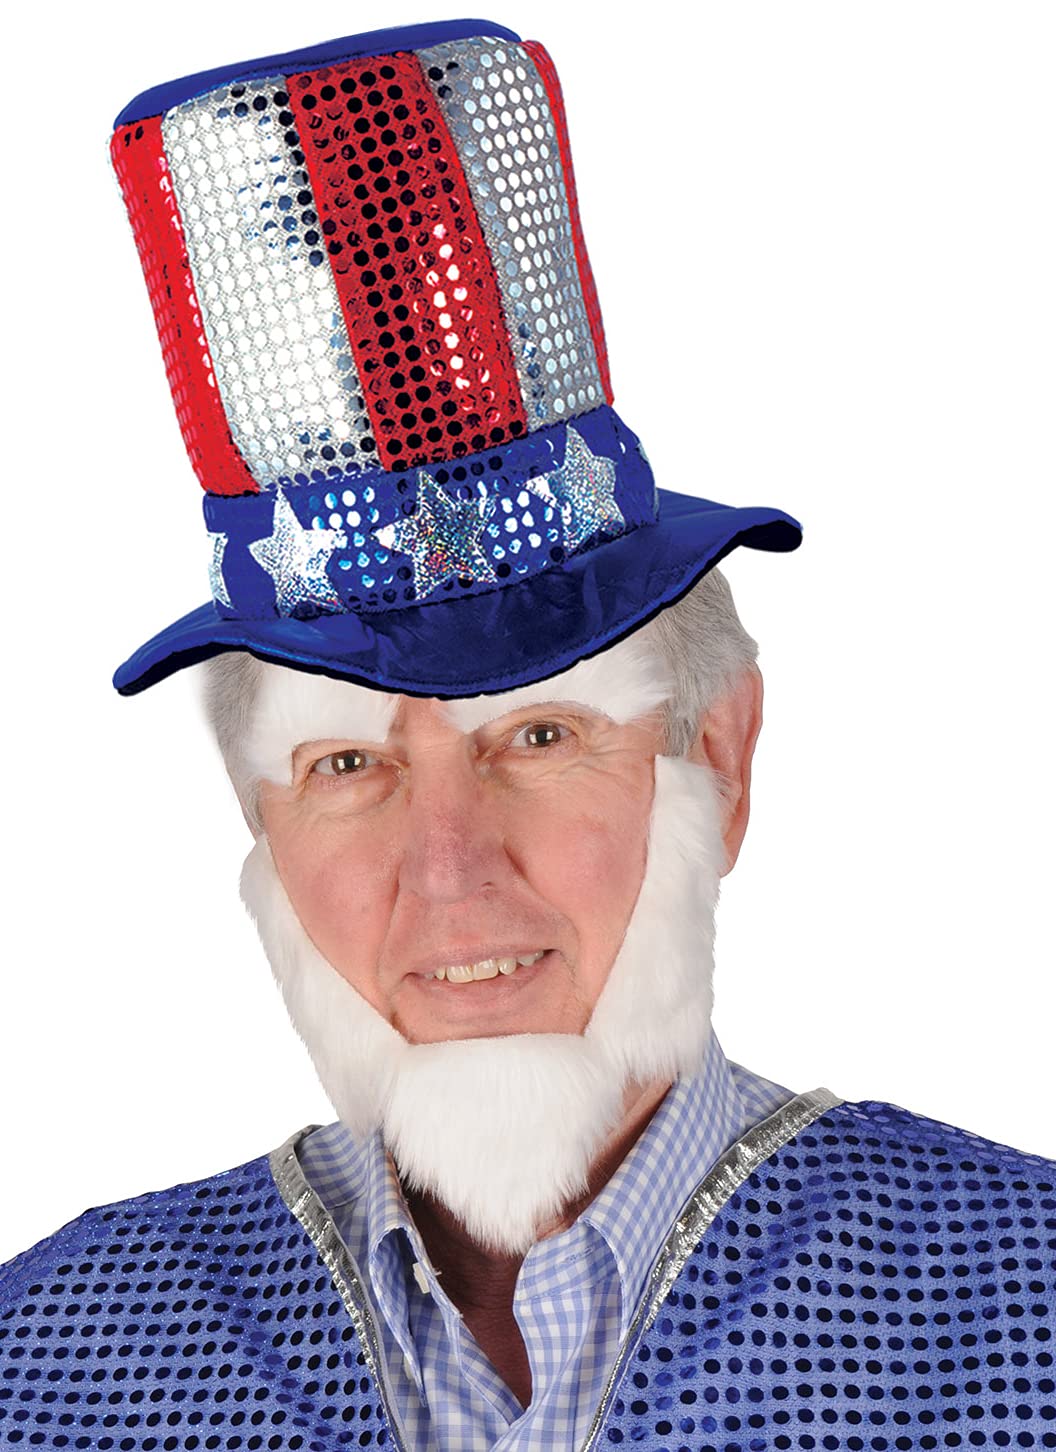 Glitz 'N Gleam Uncle Sam Top Hat Party Accessory (1 count)